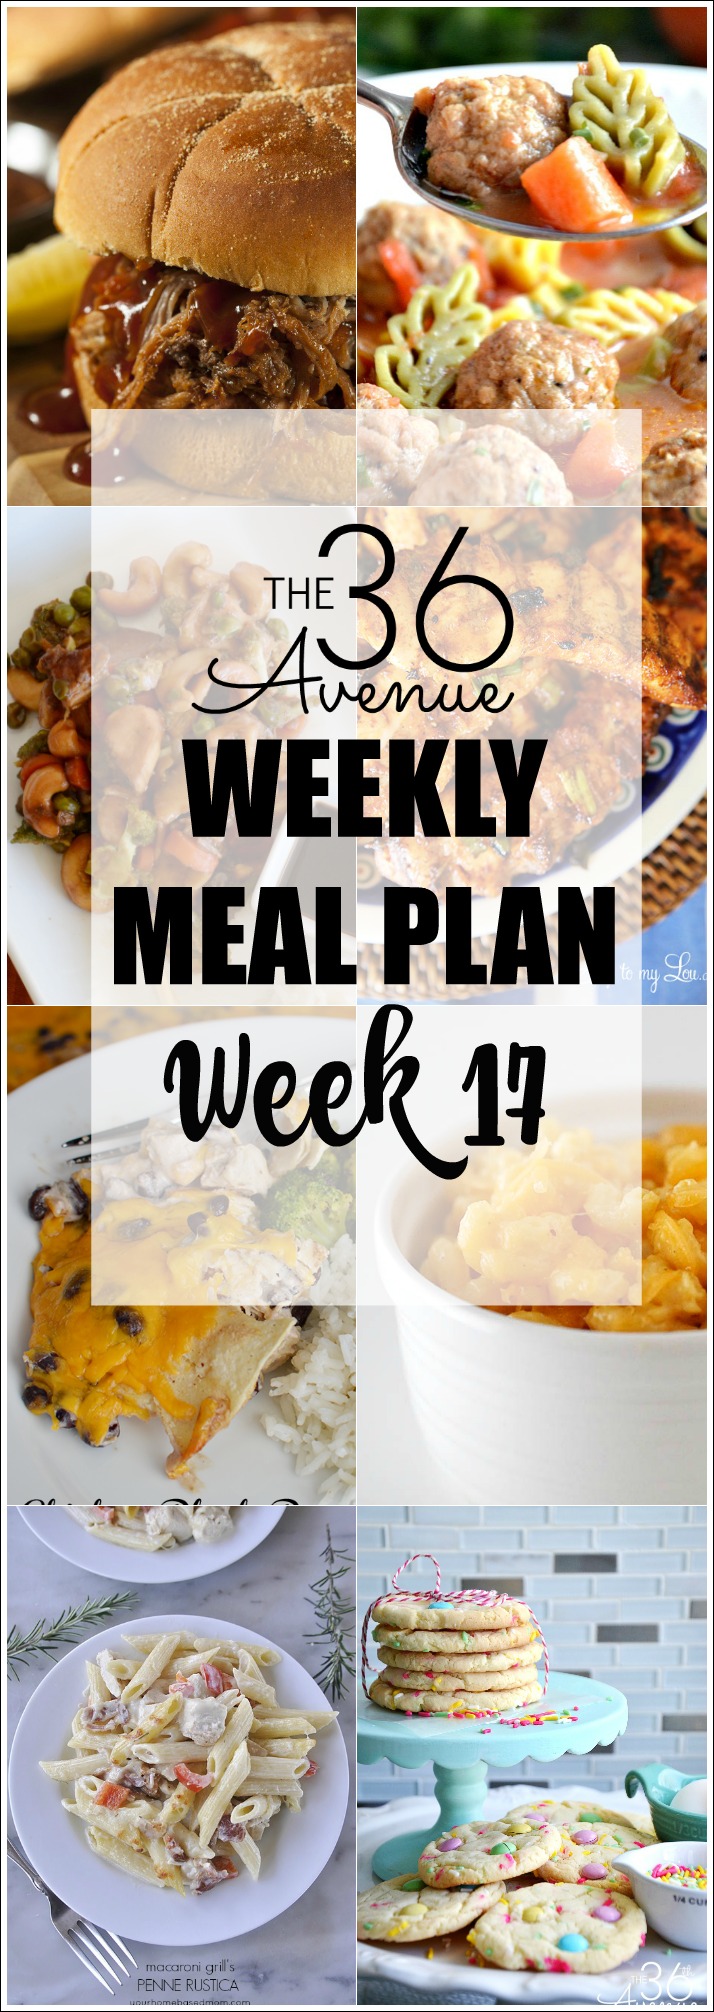 Weekly Meal Planner - Main Dishes and Dessert Recipes for each day of the week! 